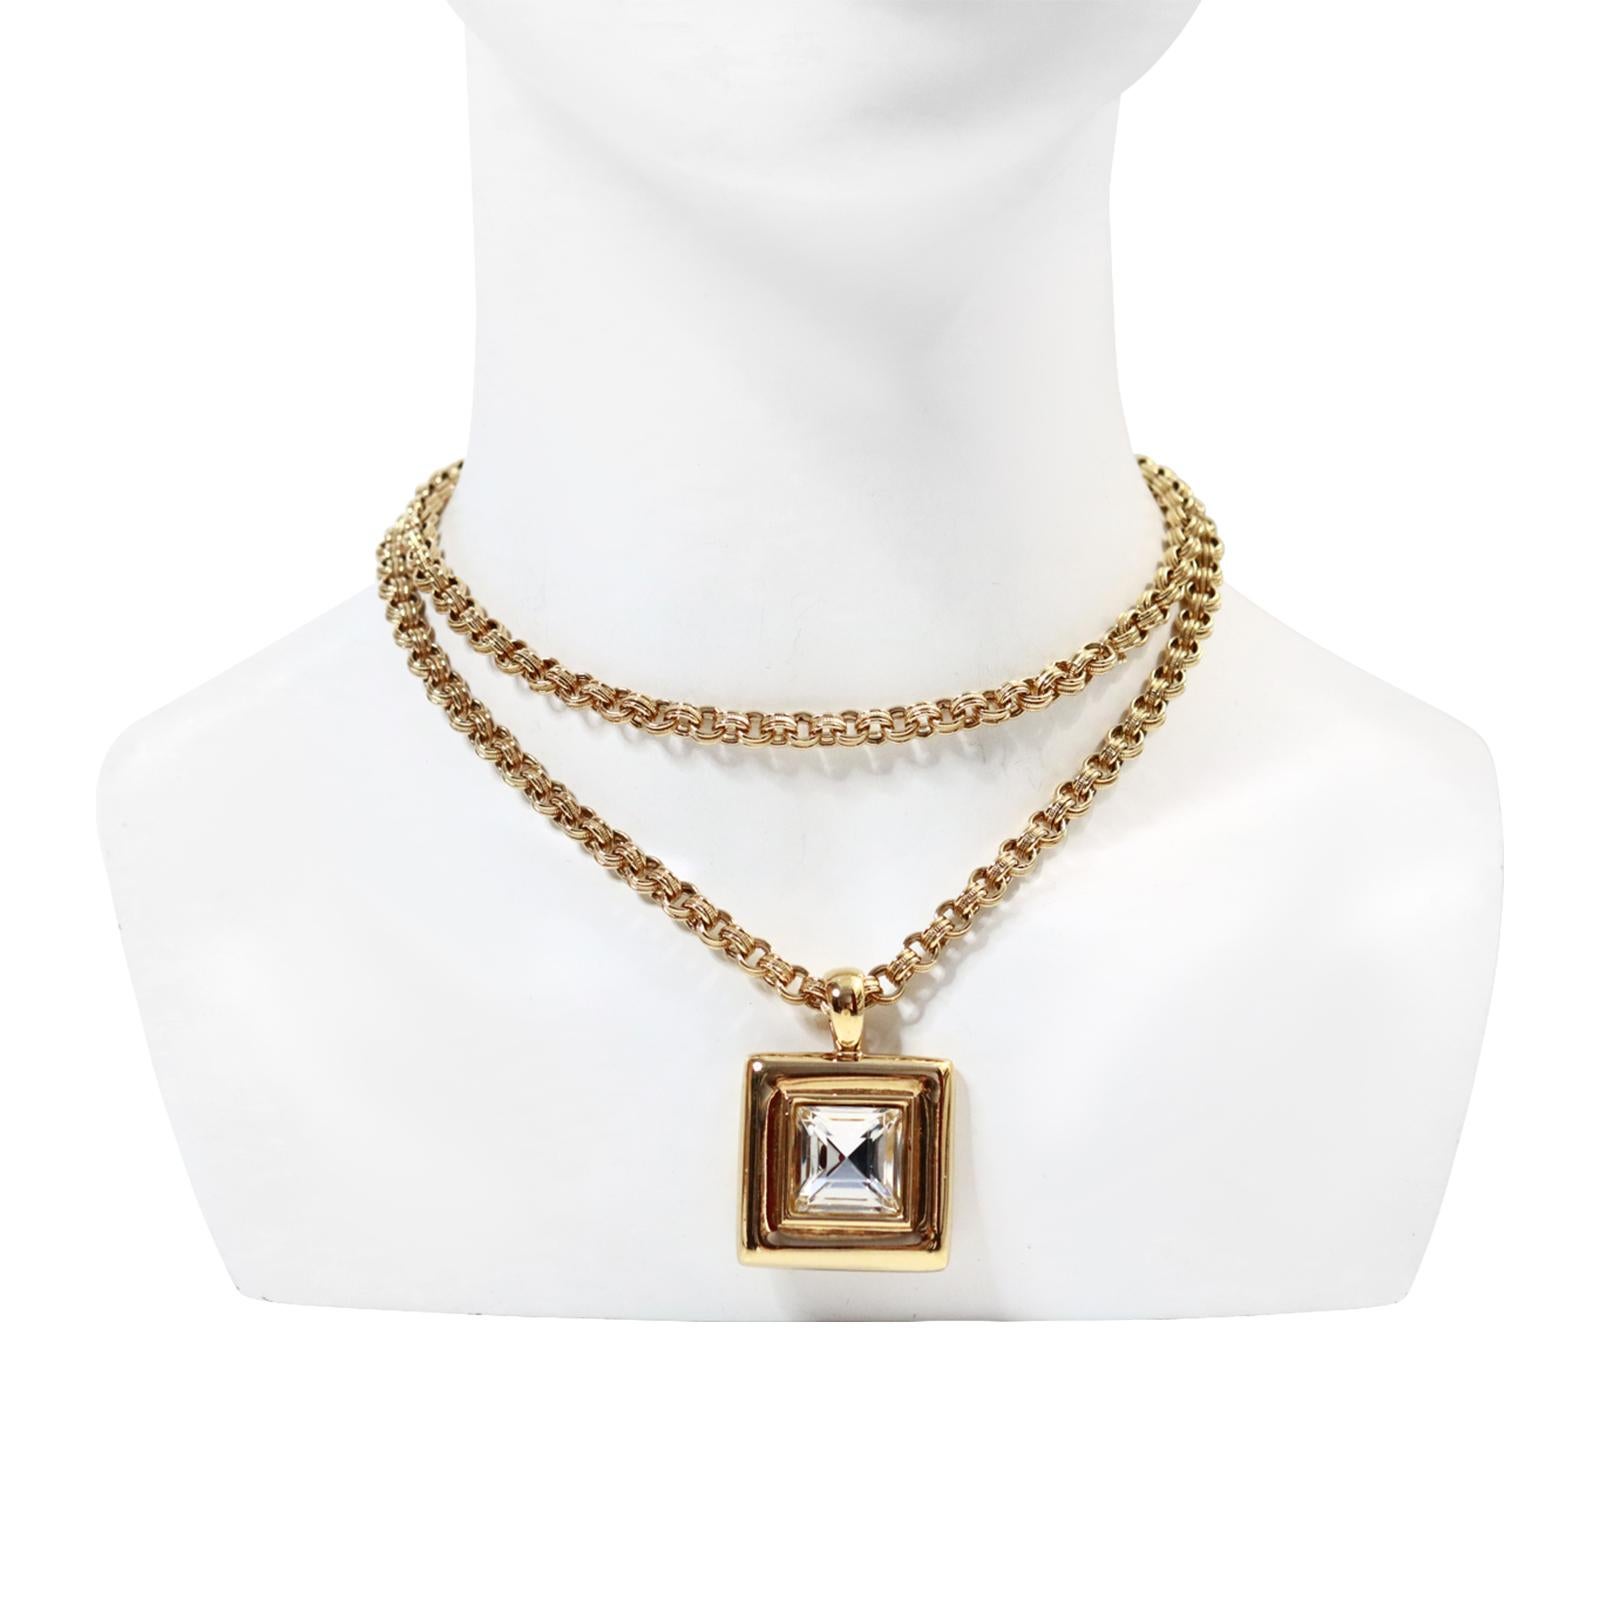 Vintage Givenchy Link Chain with Dangling Drop Necklace Circa 1980s For Sale 2